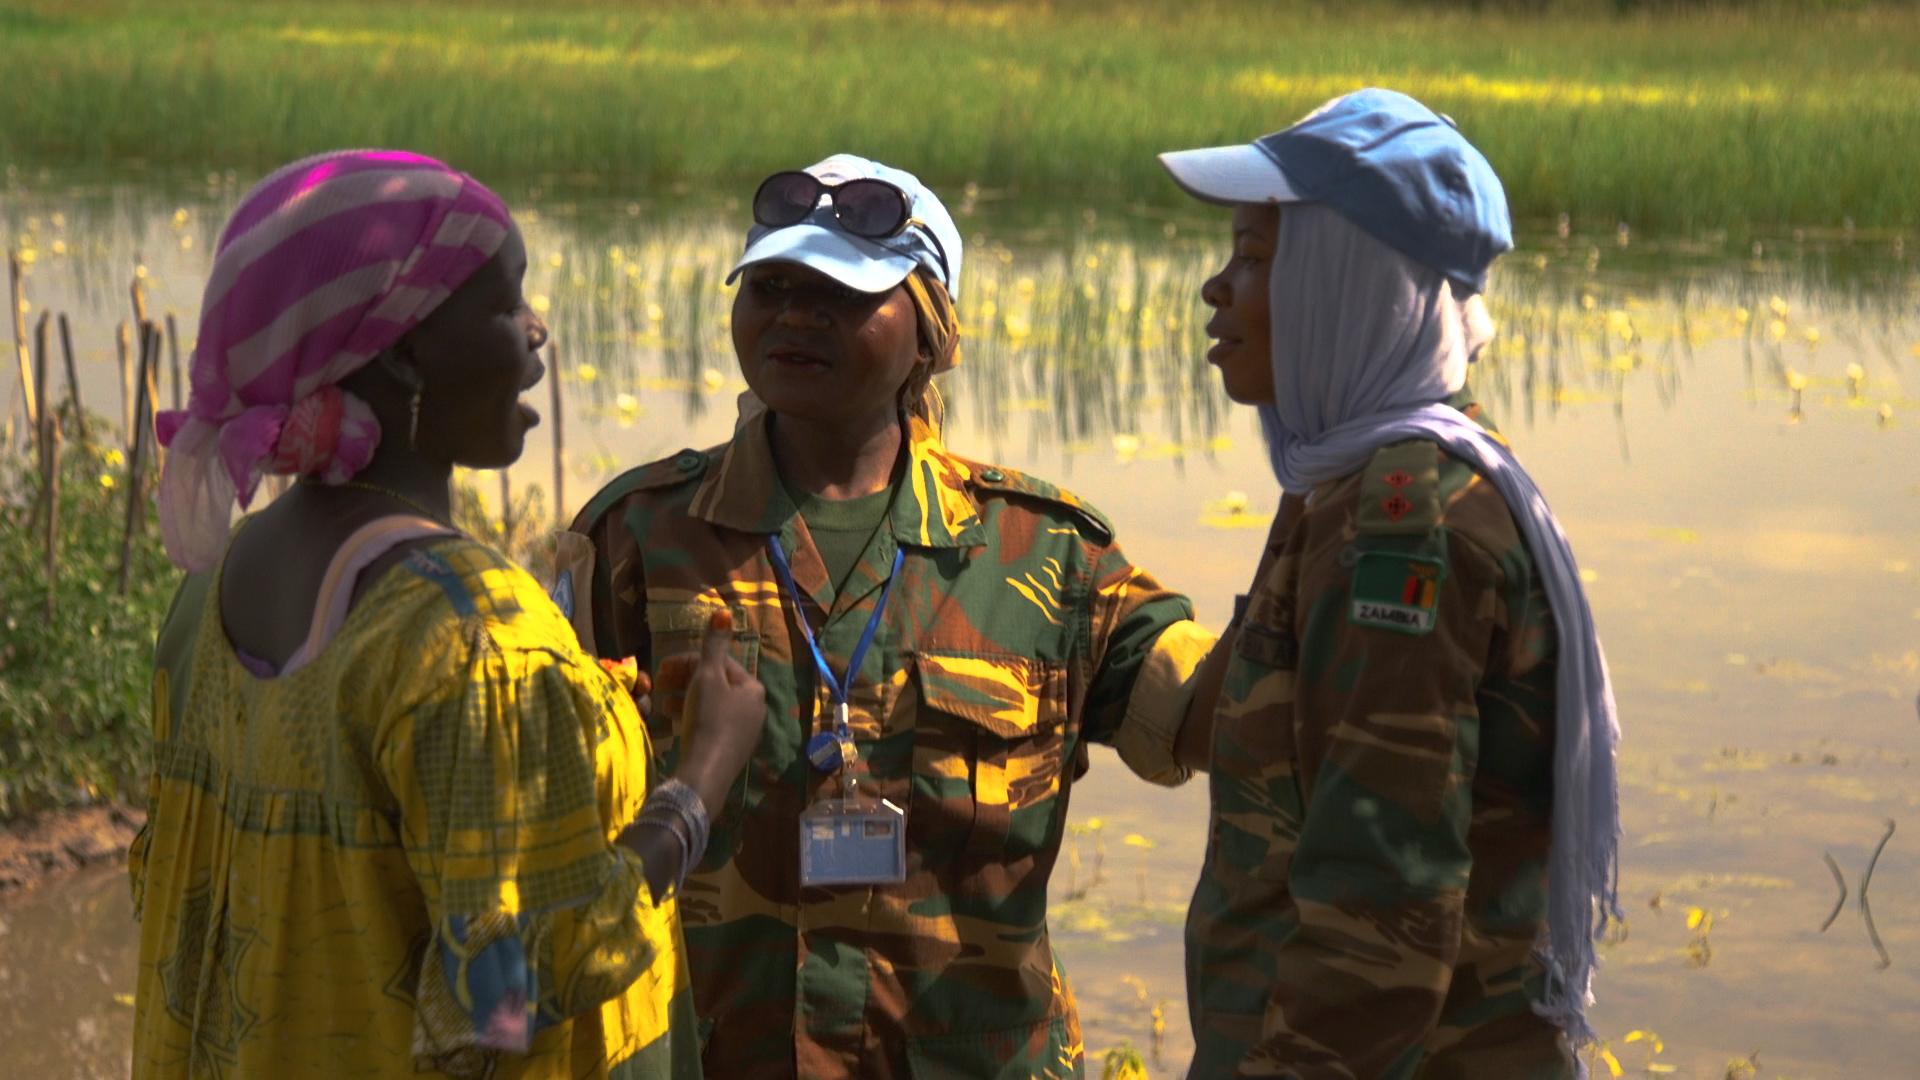 Zambian Female Peacekeepers in the Central African Republic